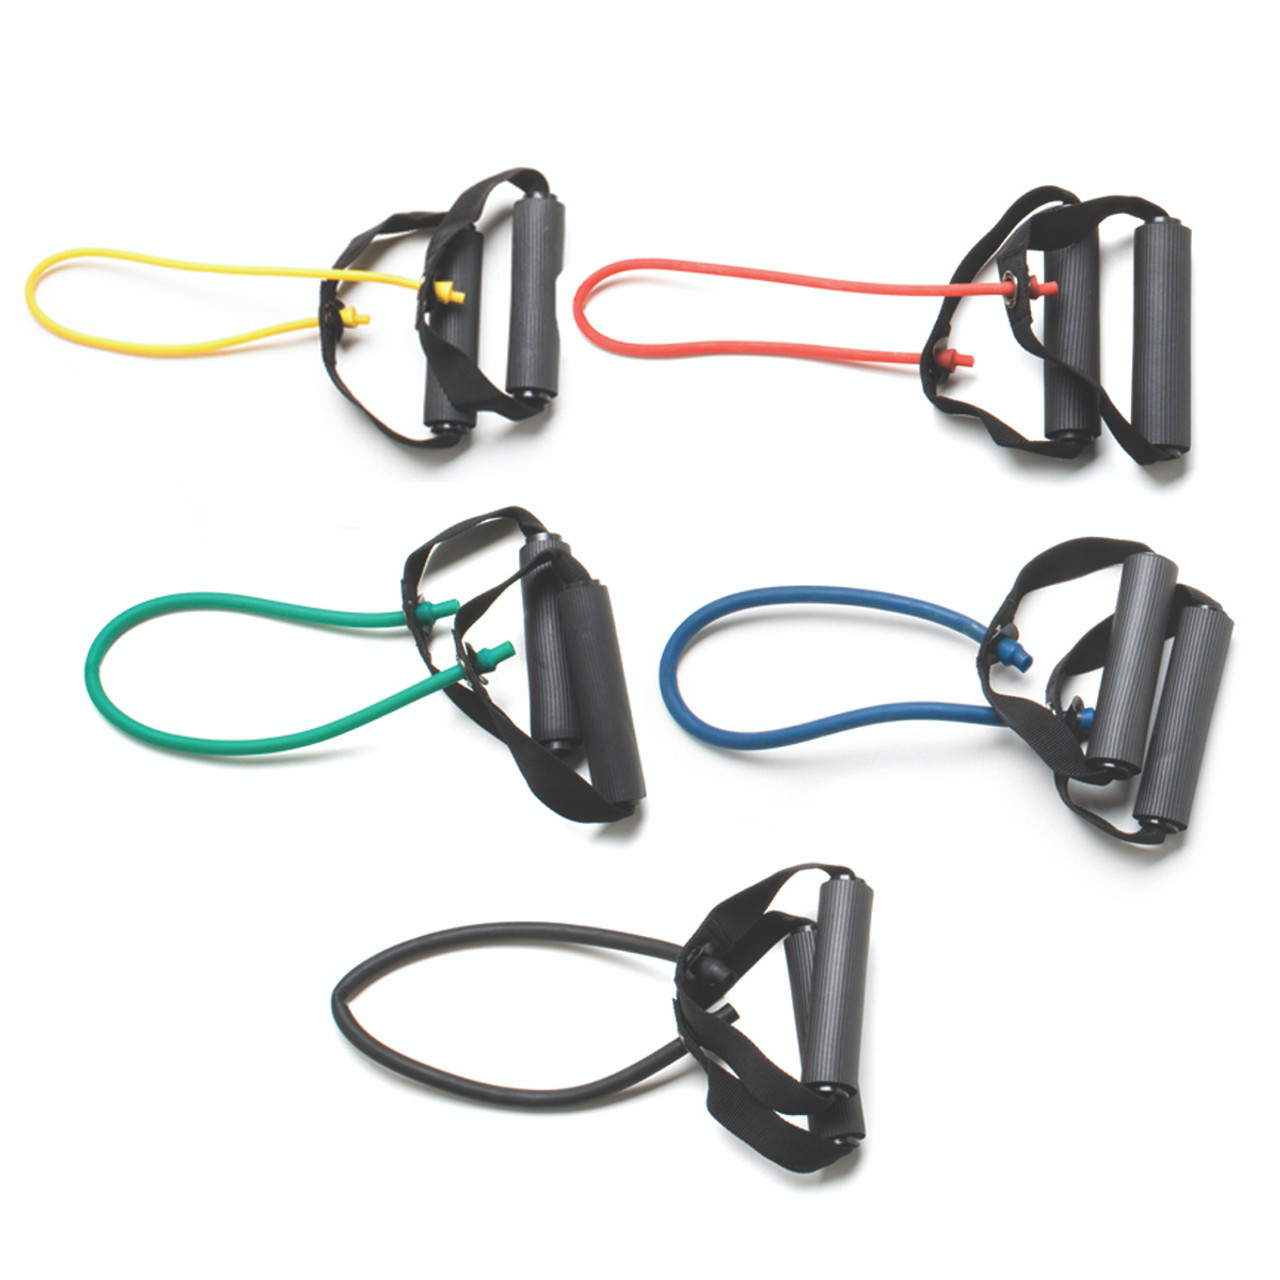 CanDo¨ Tubing with Handles Exerciser - 18", 5-piece set (1 each: yellow, red, green, blue, black)